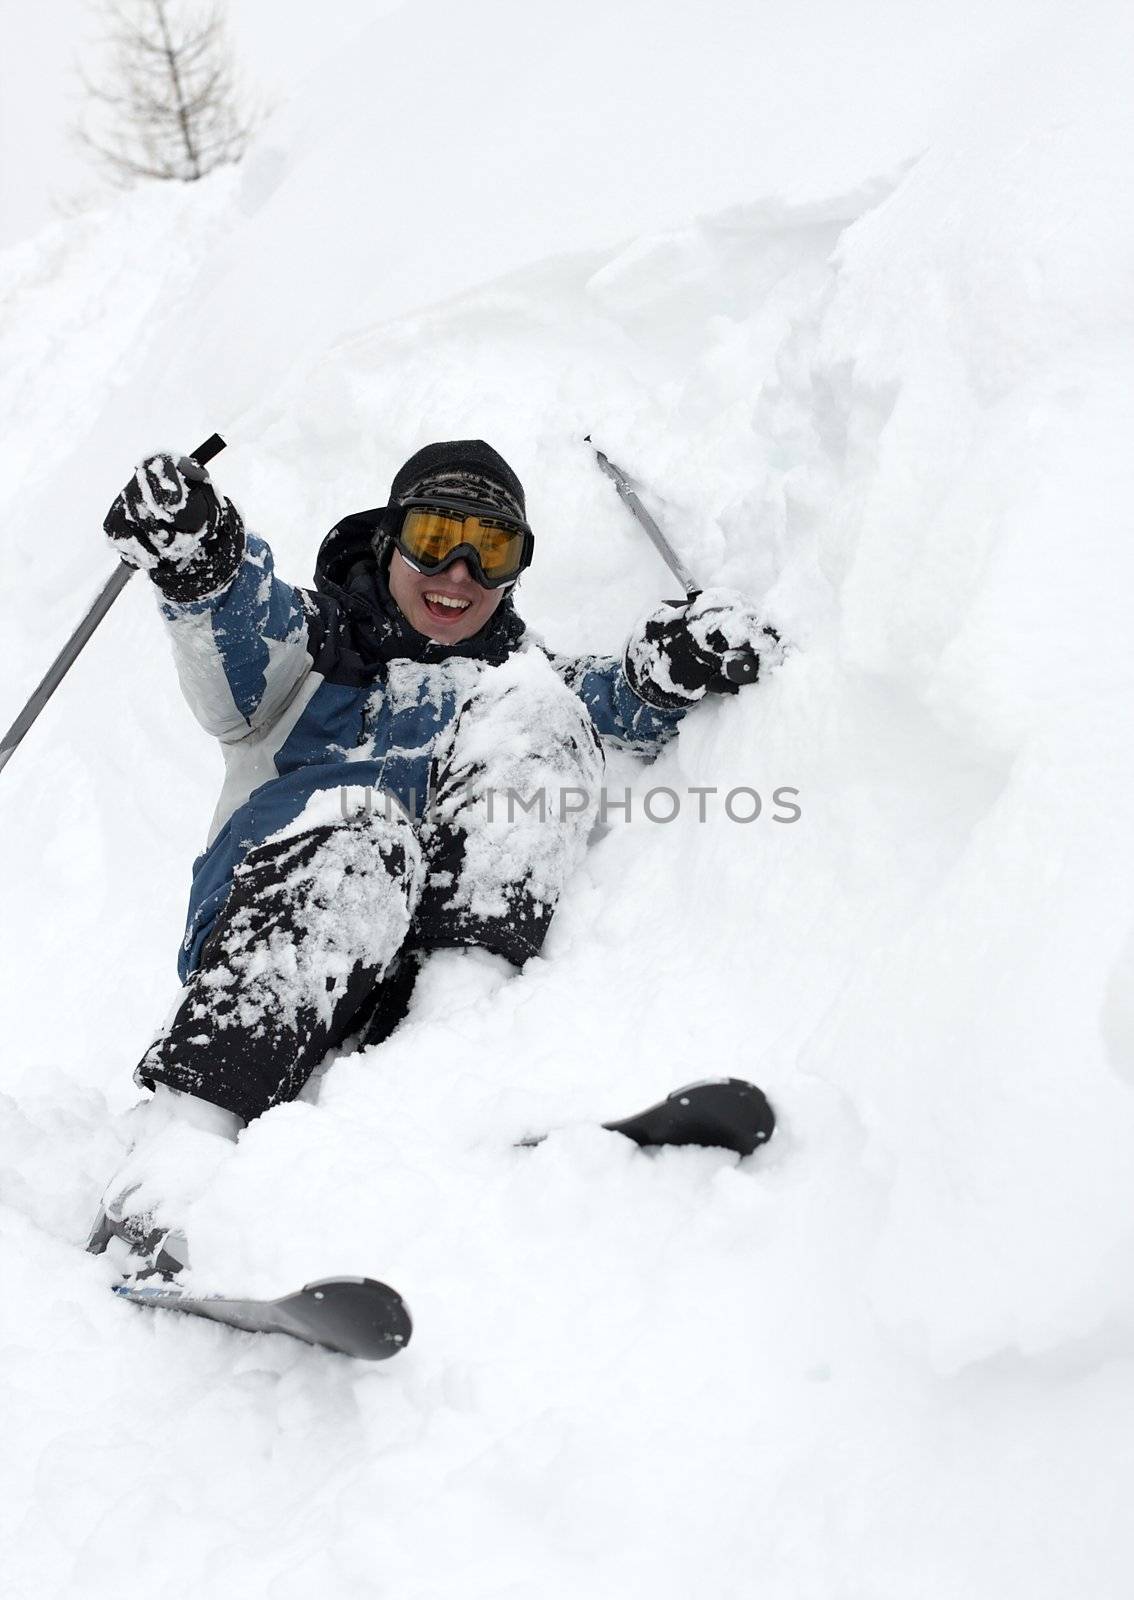 Skier falling over in deep fresh snow